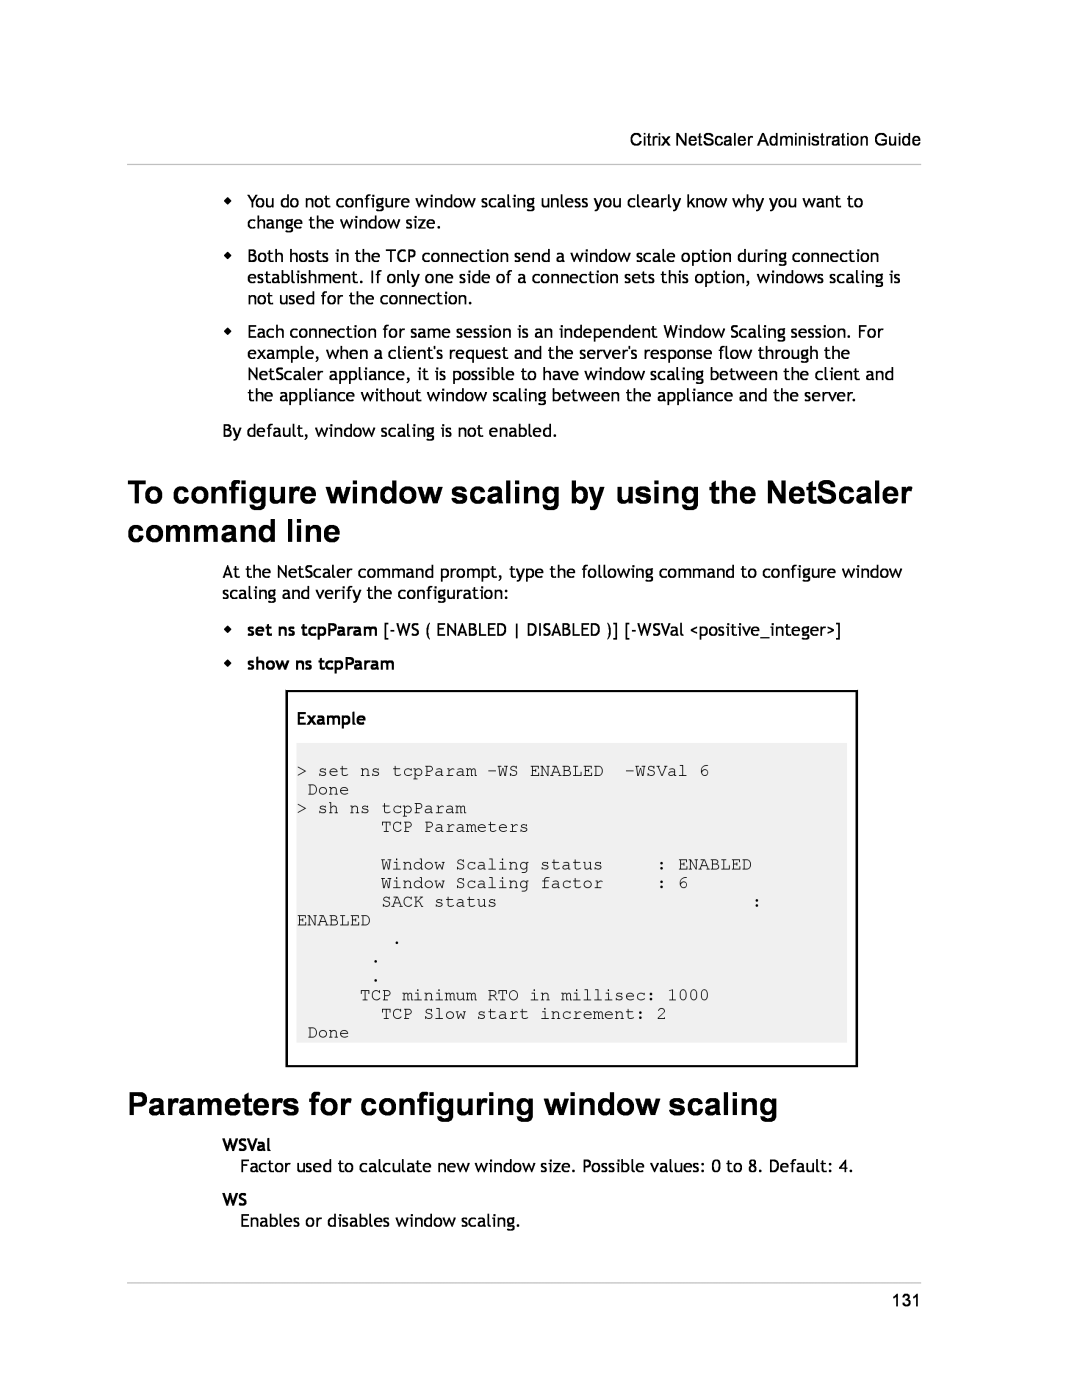 Citrix Systems CITRIX NETSCALER 9.3 manual To configure window scaling by using the NetScaler command line, WSVal 